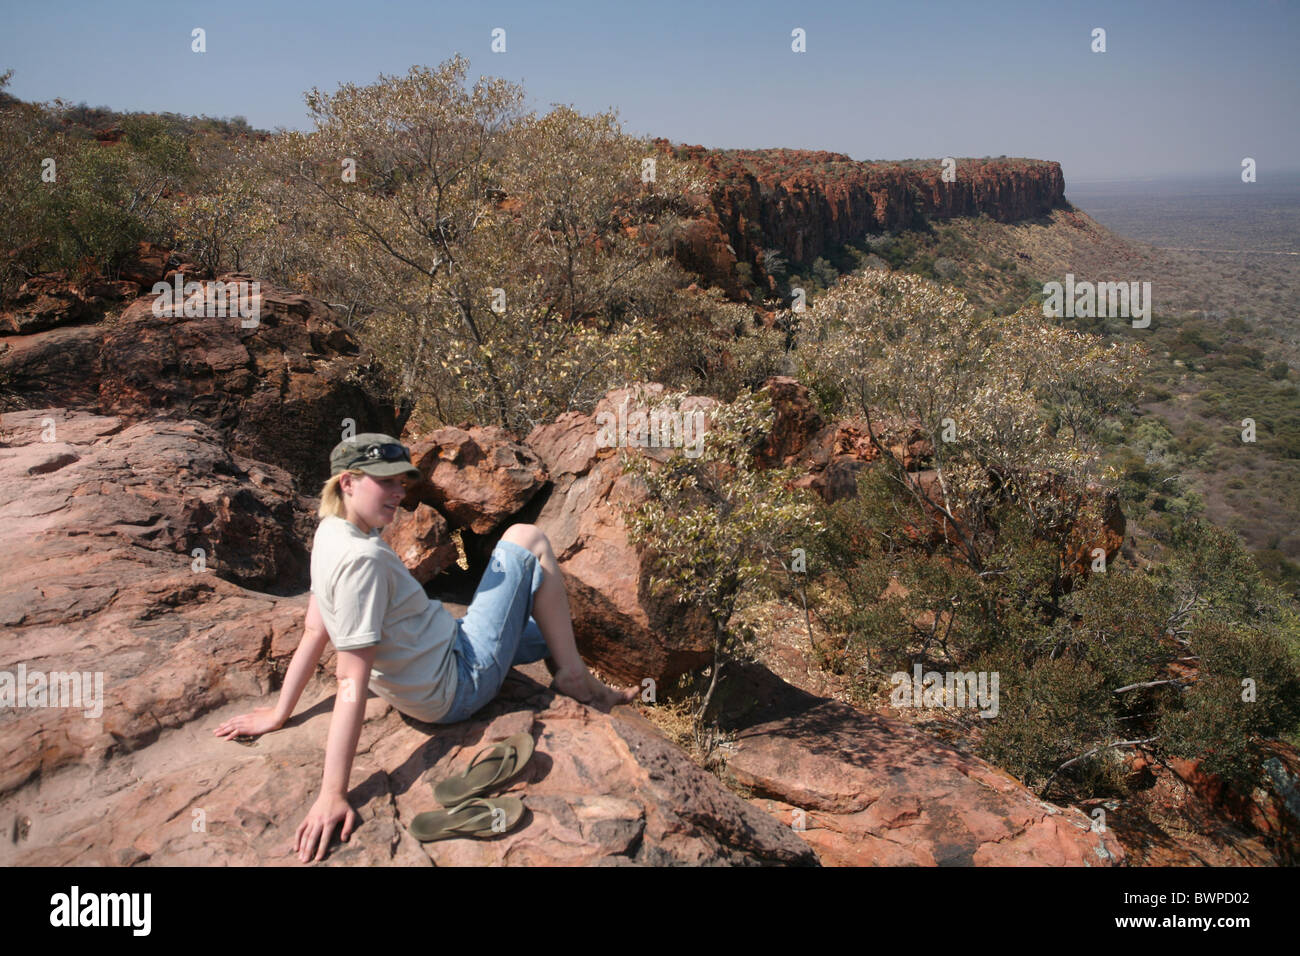 Namibia Africa Waterberg Summer 2007 Africa landscape nature mountain mountains rock woman one person sitt Stock Photo